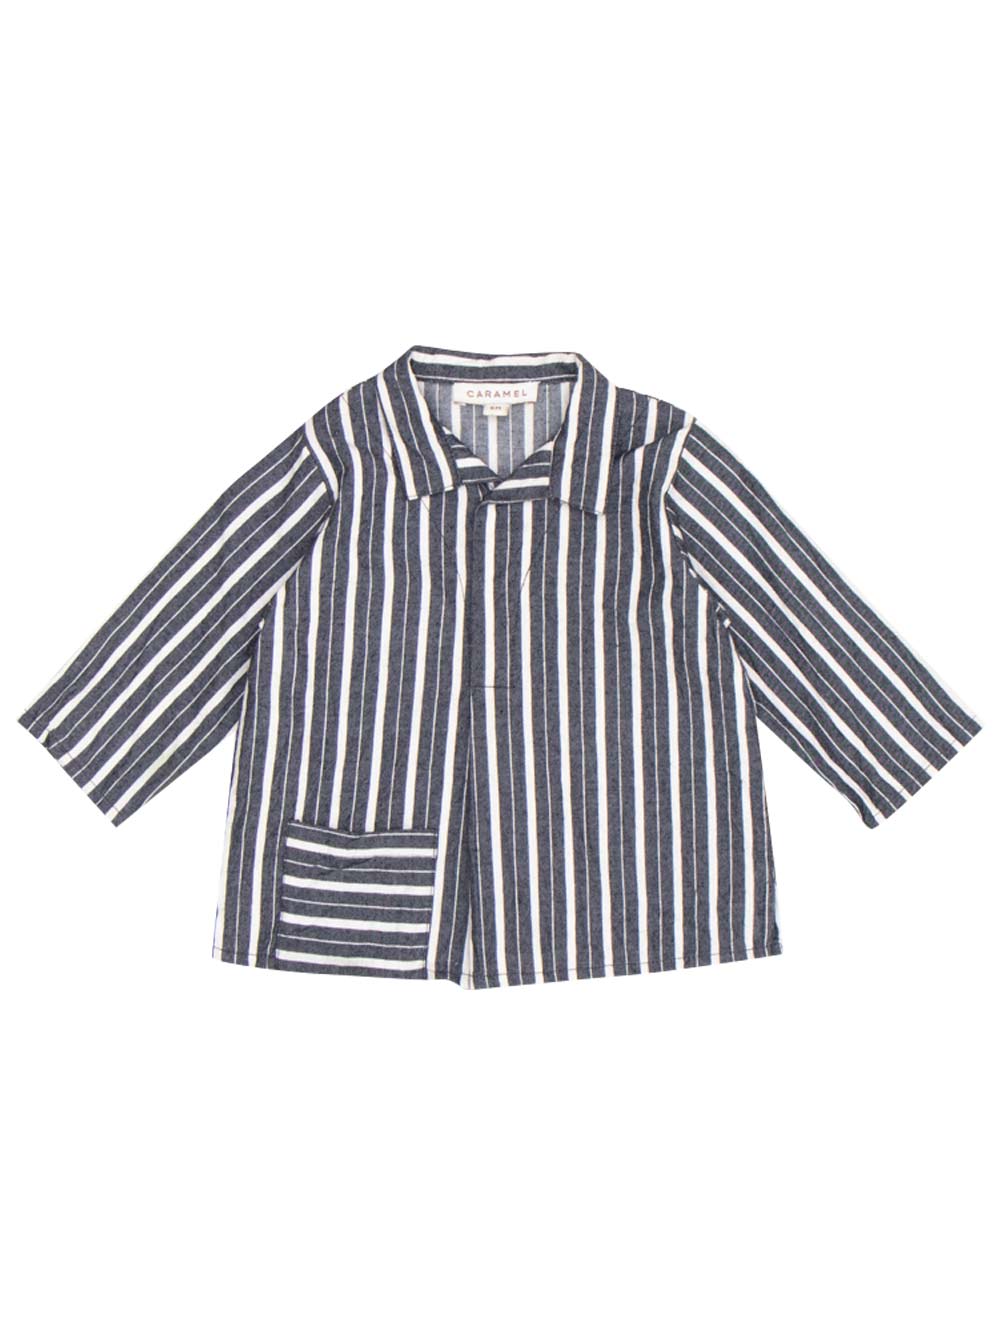 Piper Baby Striped Shirt